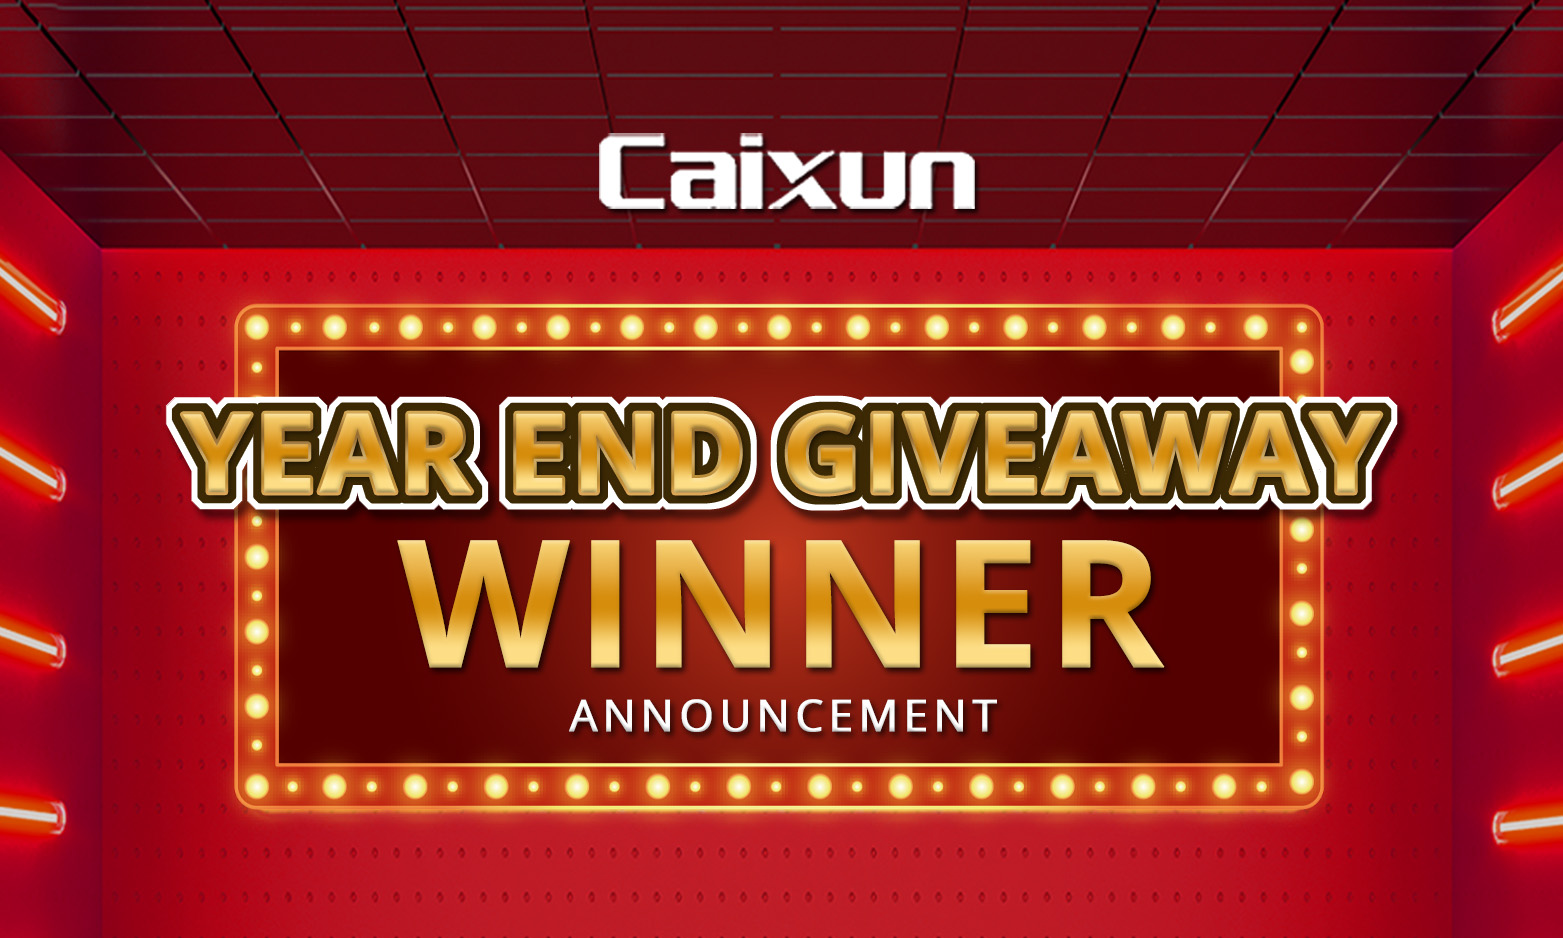 Year End Giveaway Campaign 2021: Winner Announcement